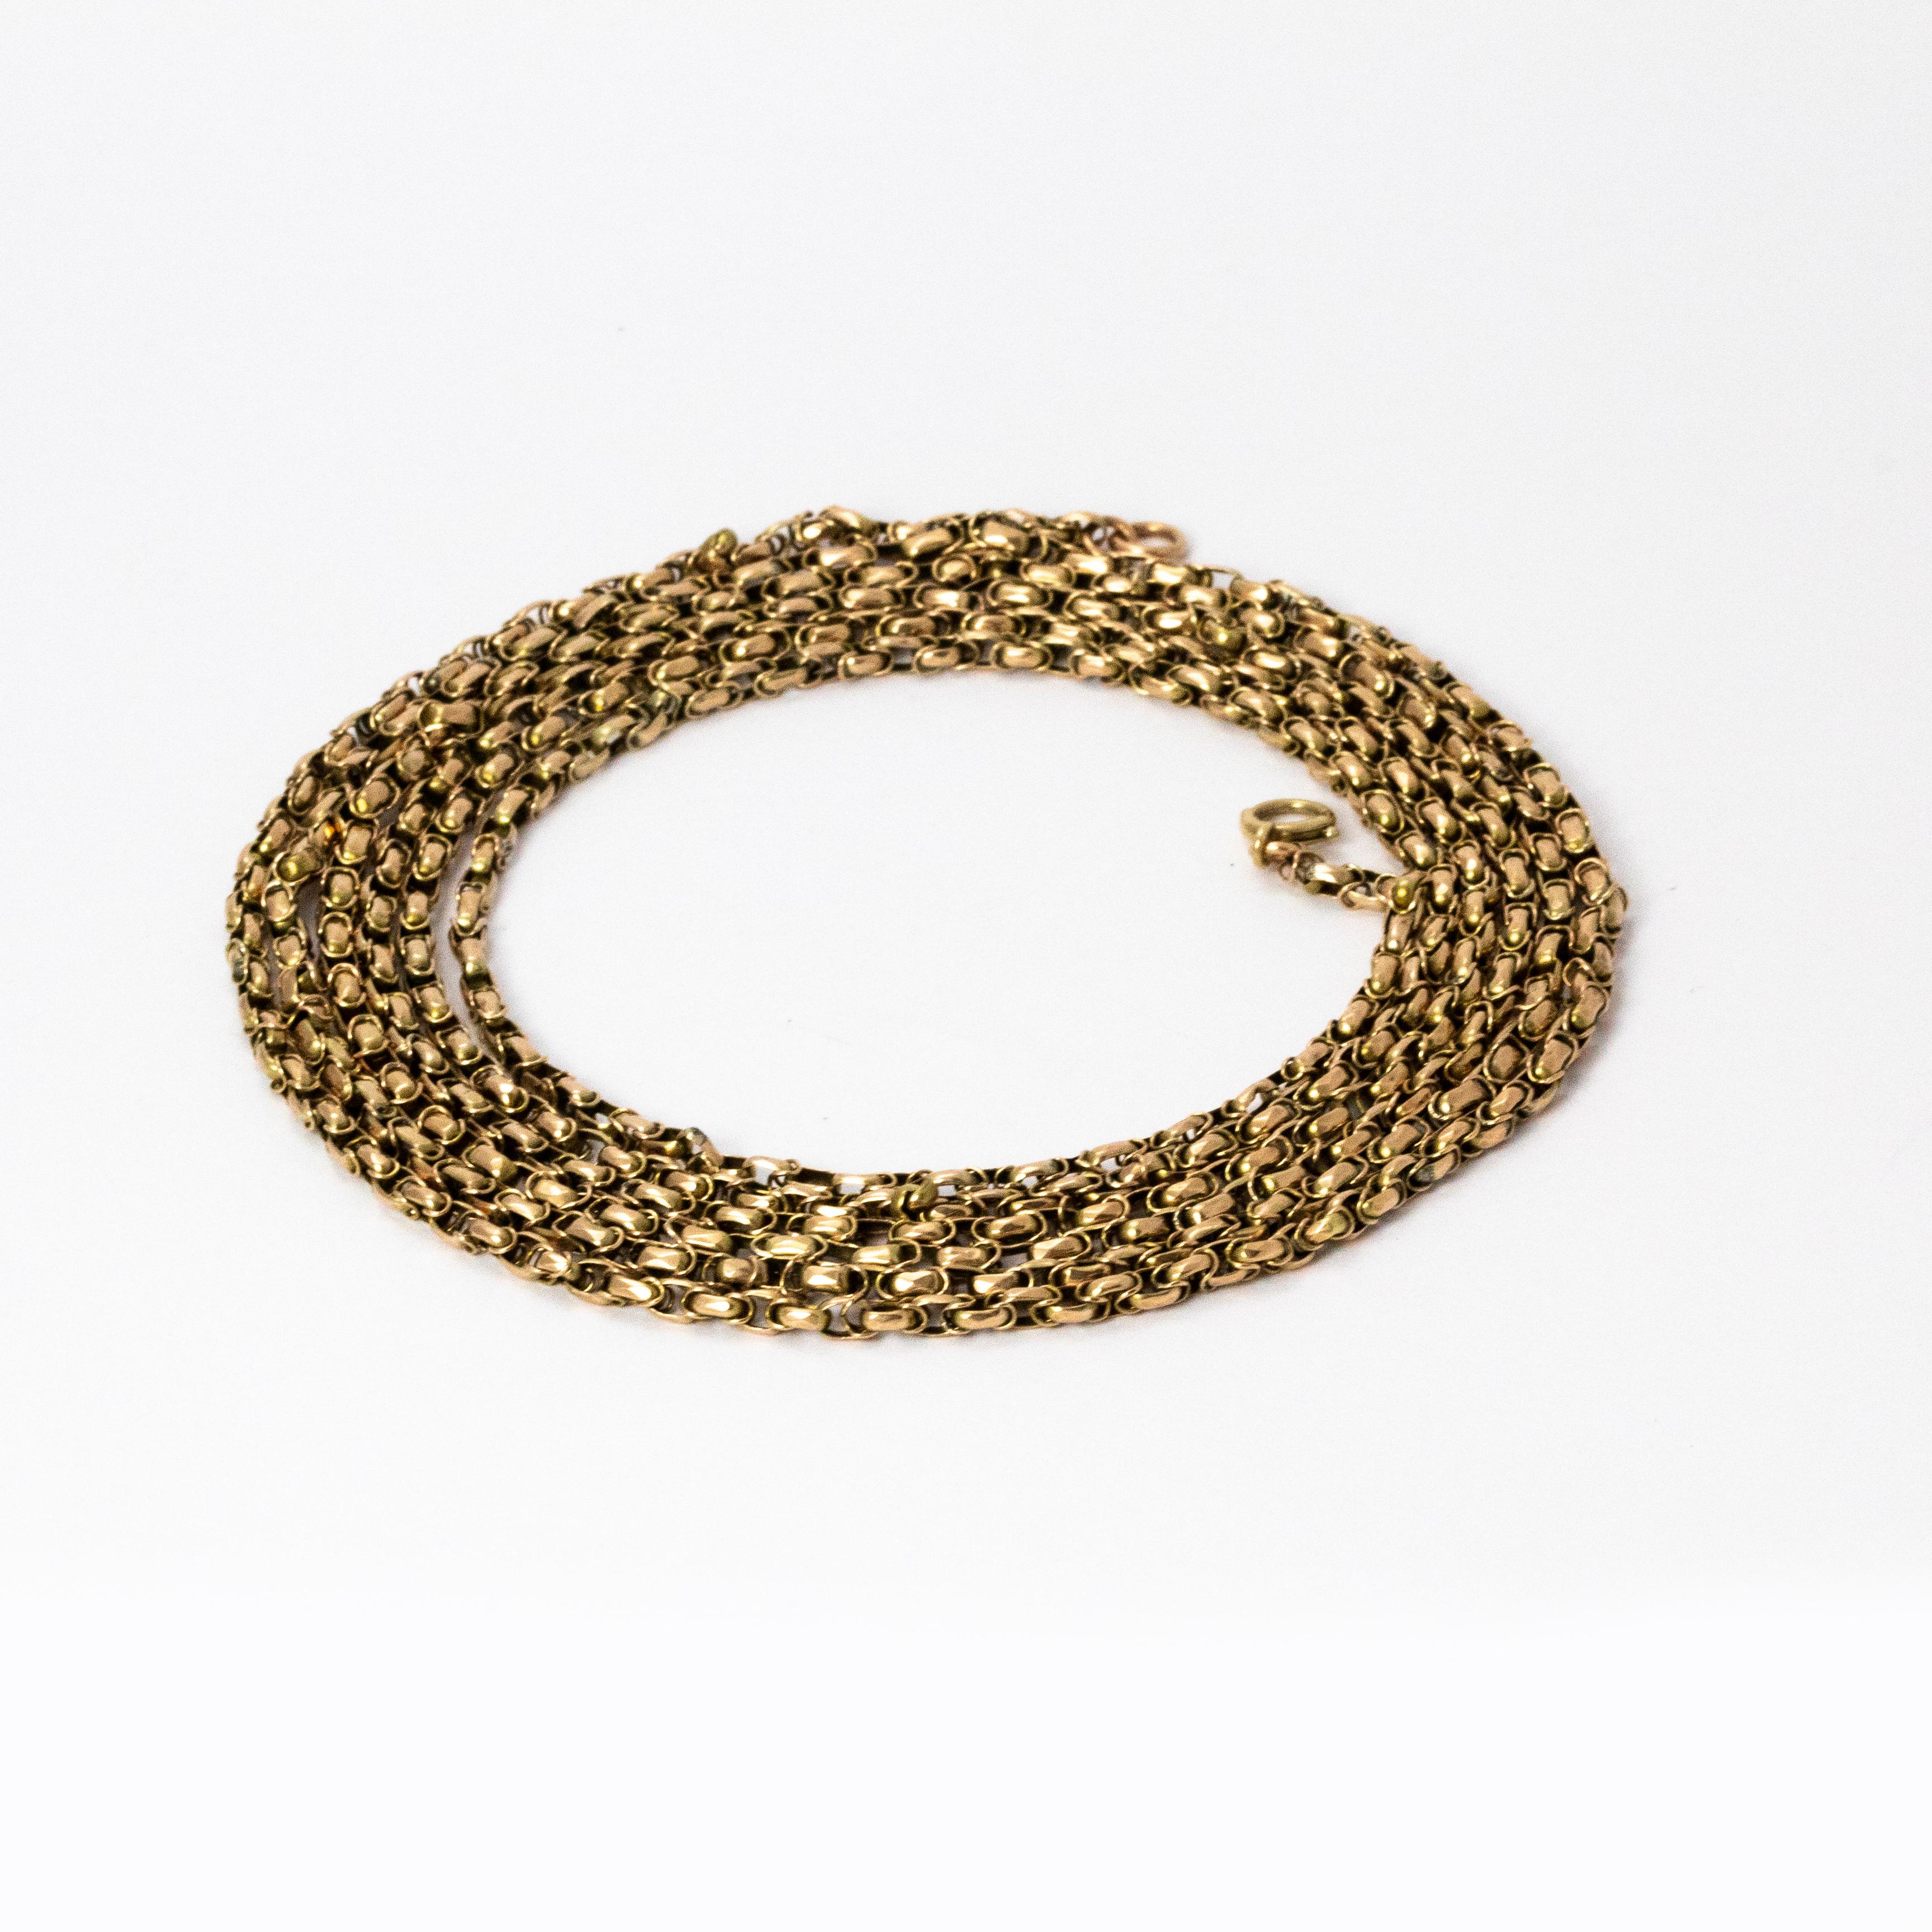 A fantastic Edwardian long guard chain necklace measures an impressive 75 cm in length, making it a fantastically wearable piece. Modelled in bright yellow 9 karat gold.